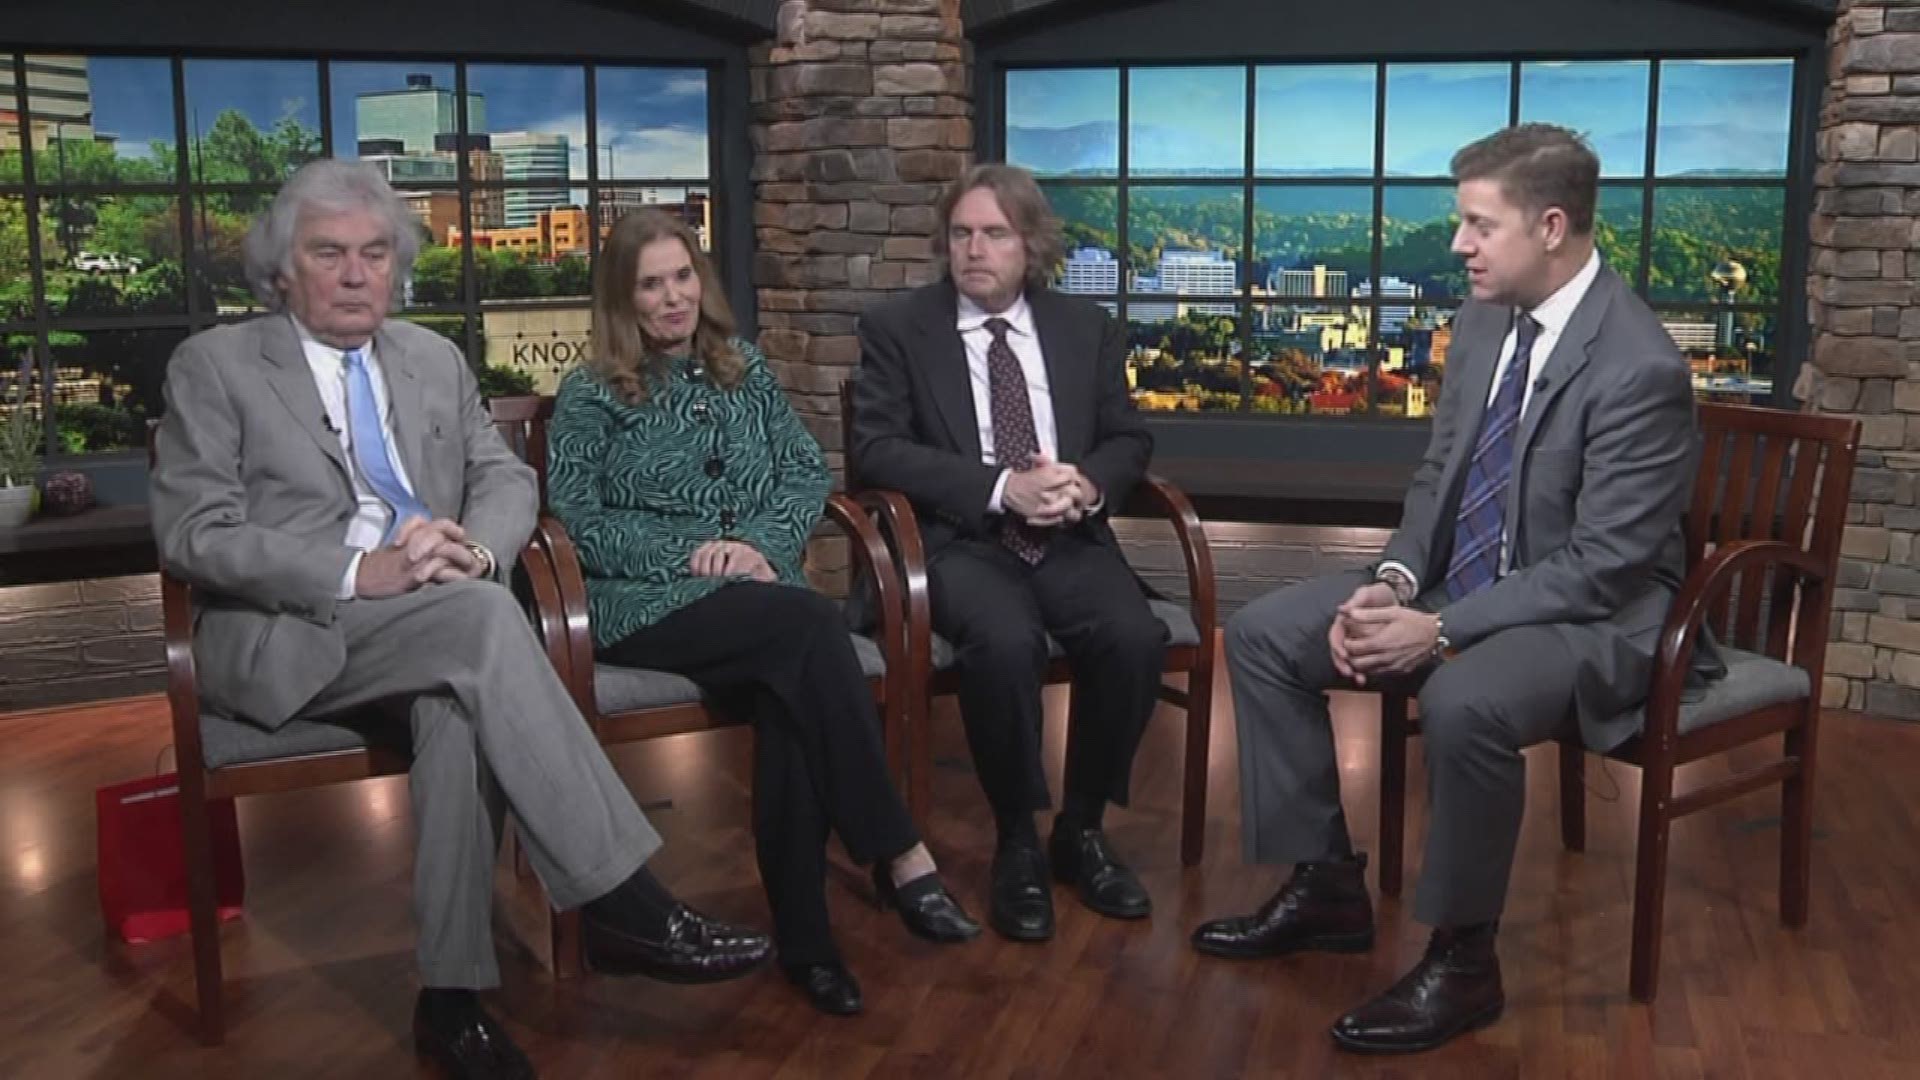 Tennessee lawmakers Frank Niceley, Gloria Johnson and Justin Lafferty talk about the new legislative session.